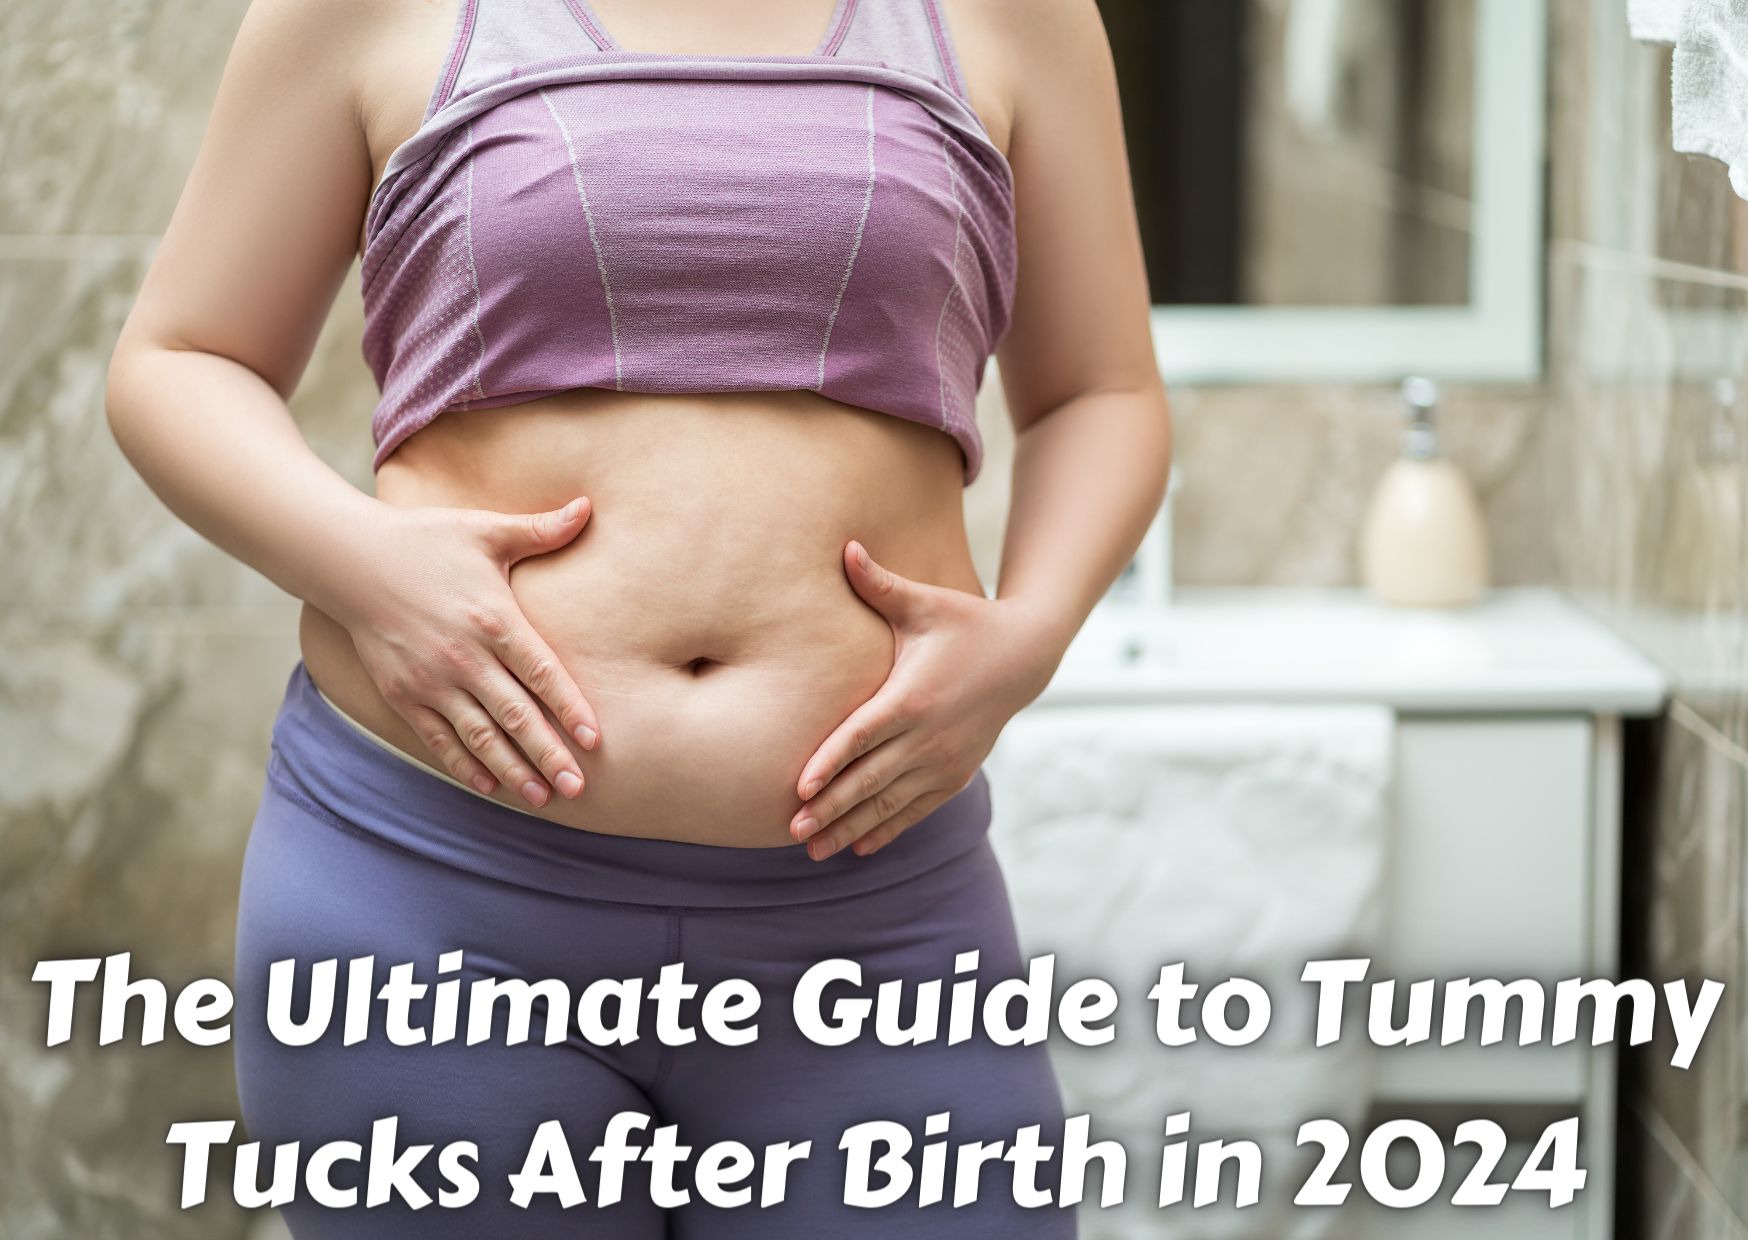 The Ultimate Guide to Tummy Tucks After Birth in 2024